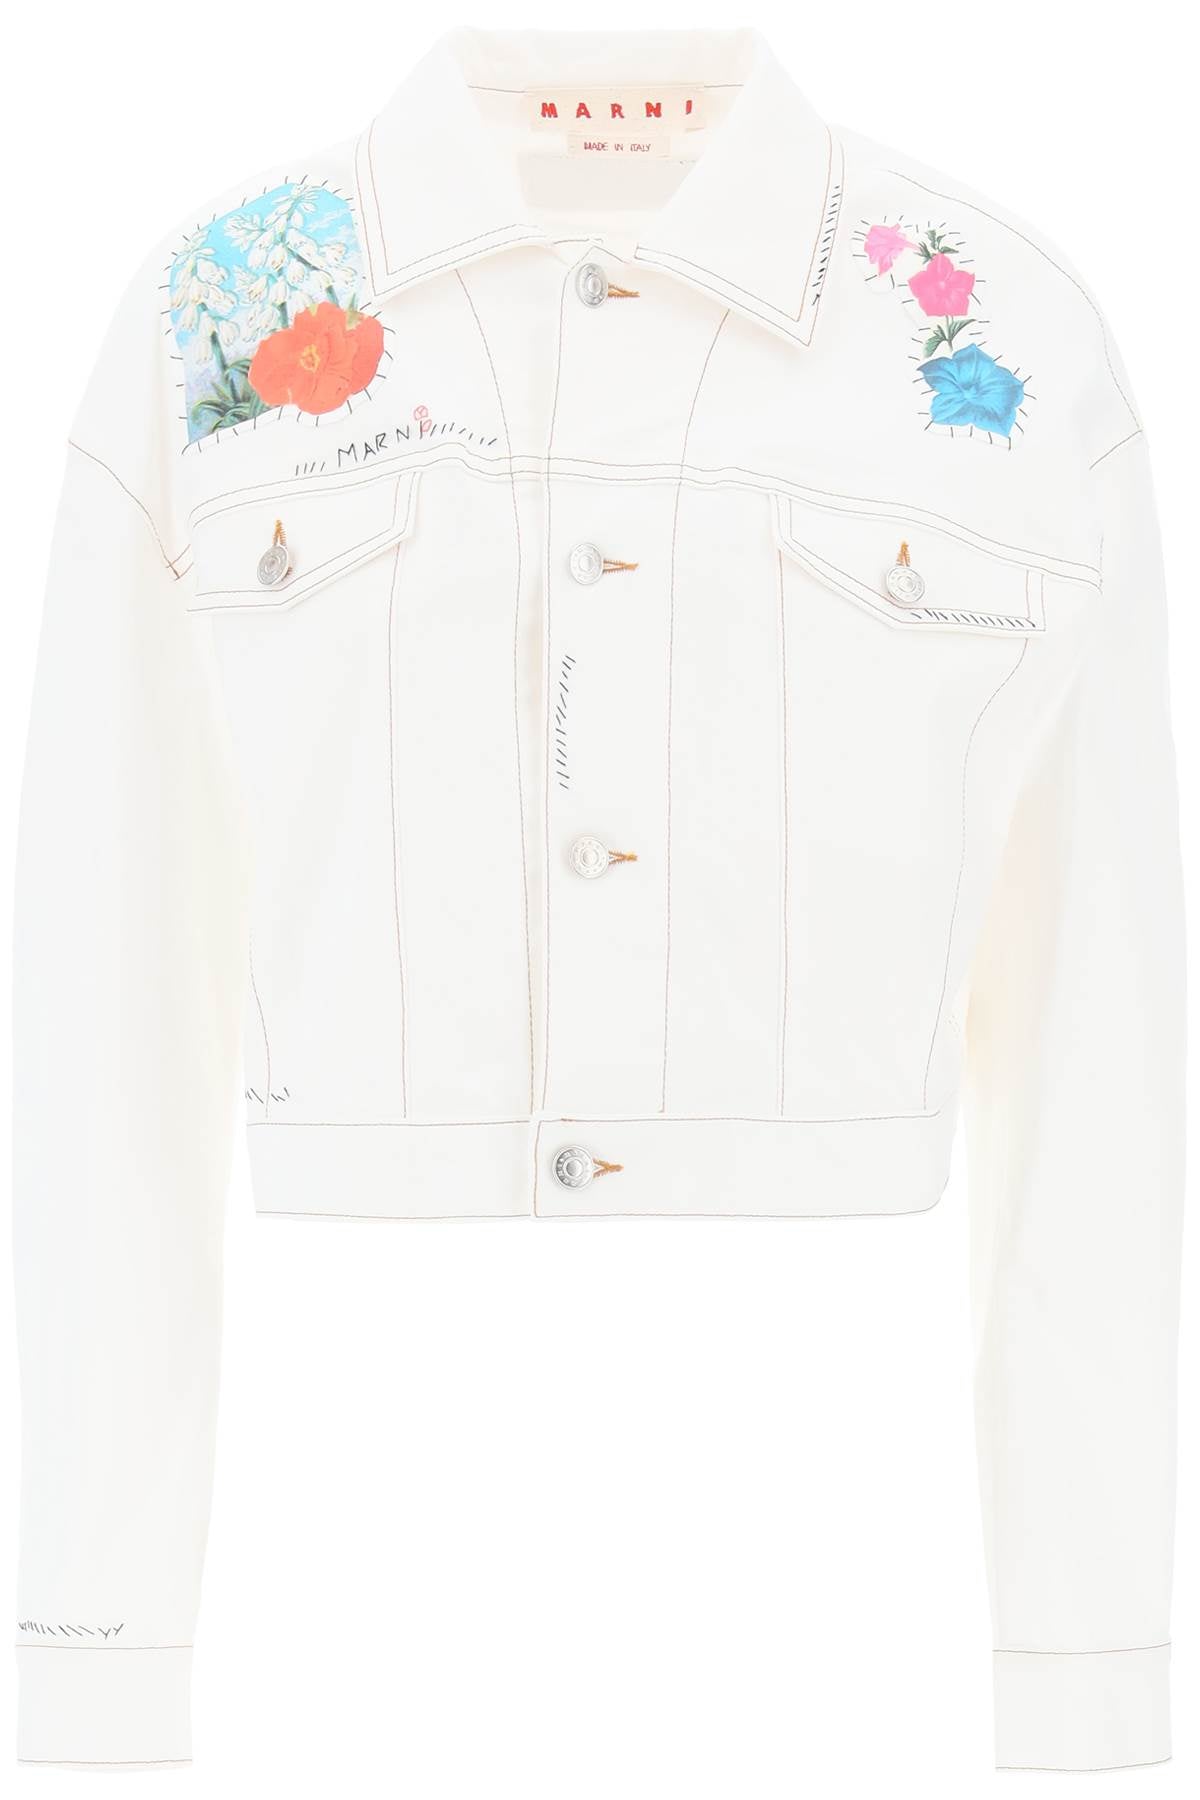 MARNI White Cropped Denim Jacket with Flower Patches and Embroidery for Women